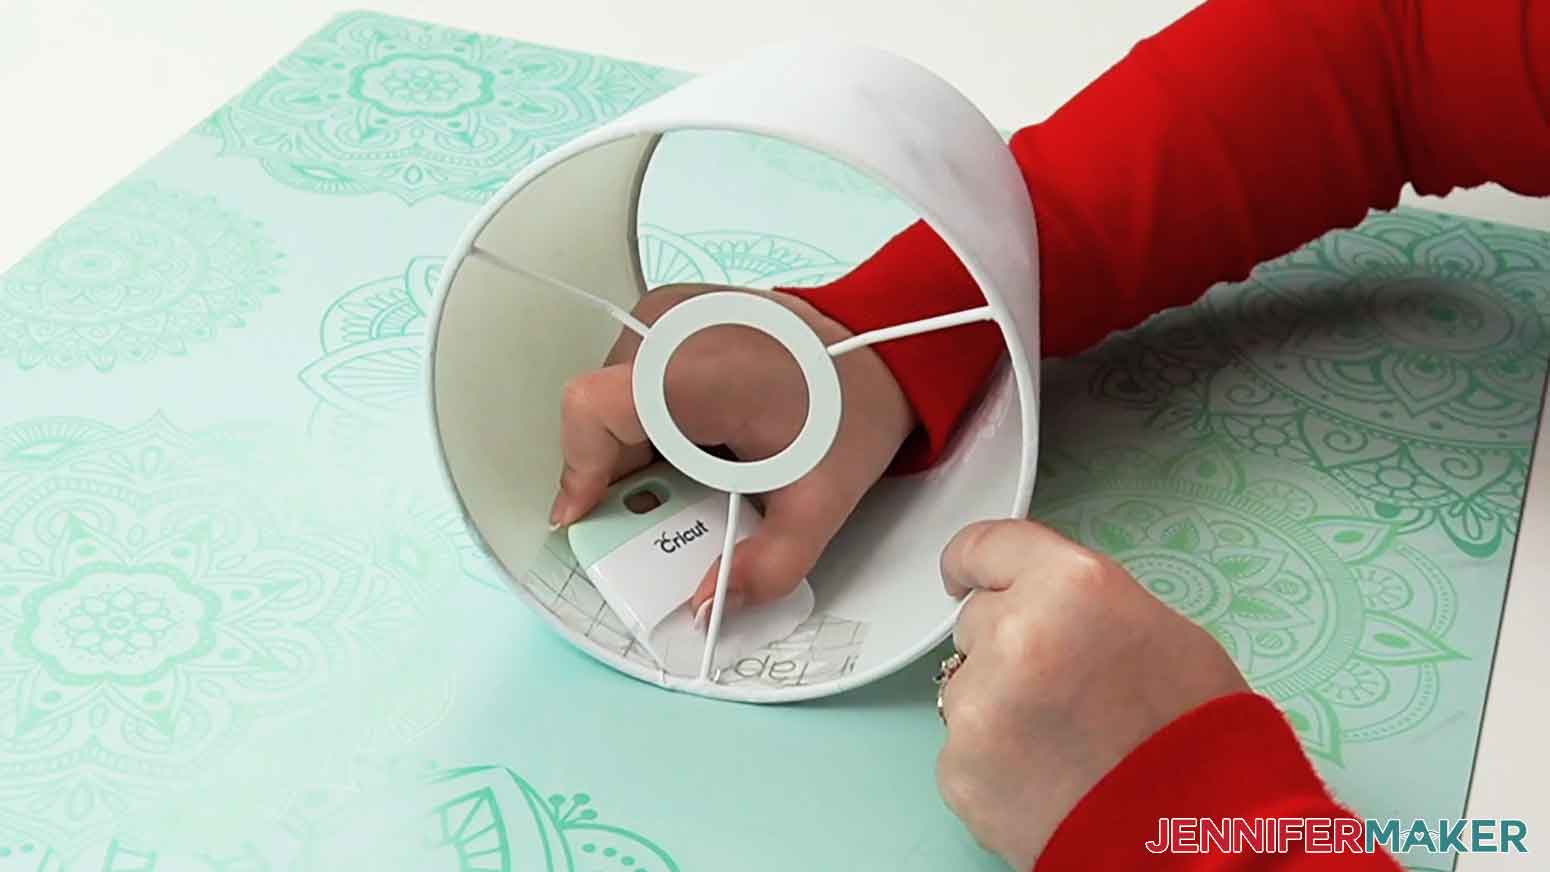 Use a scraper tool to burnish the vinyl to the inside of the lampshade.